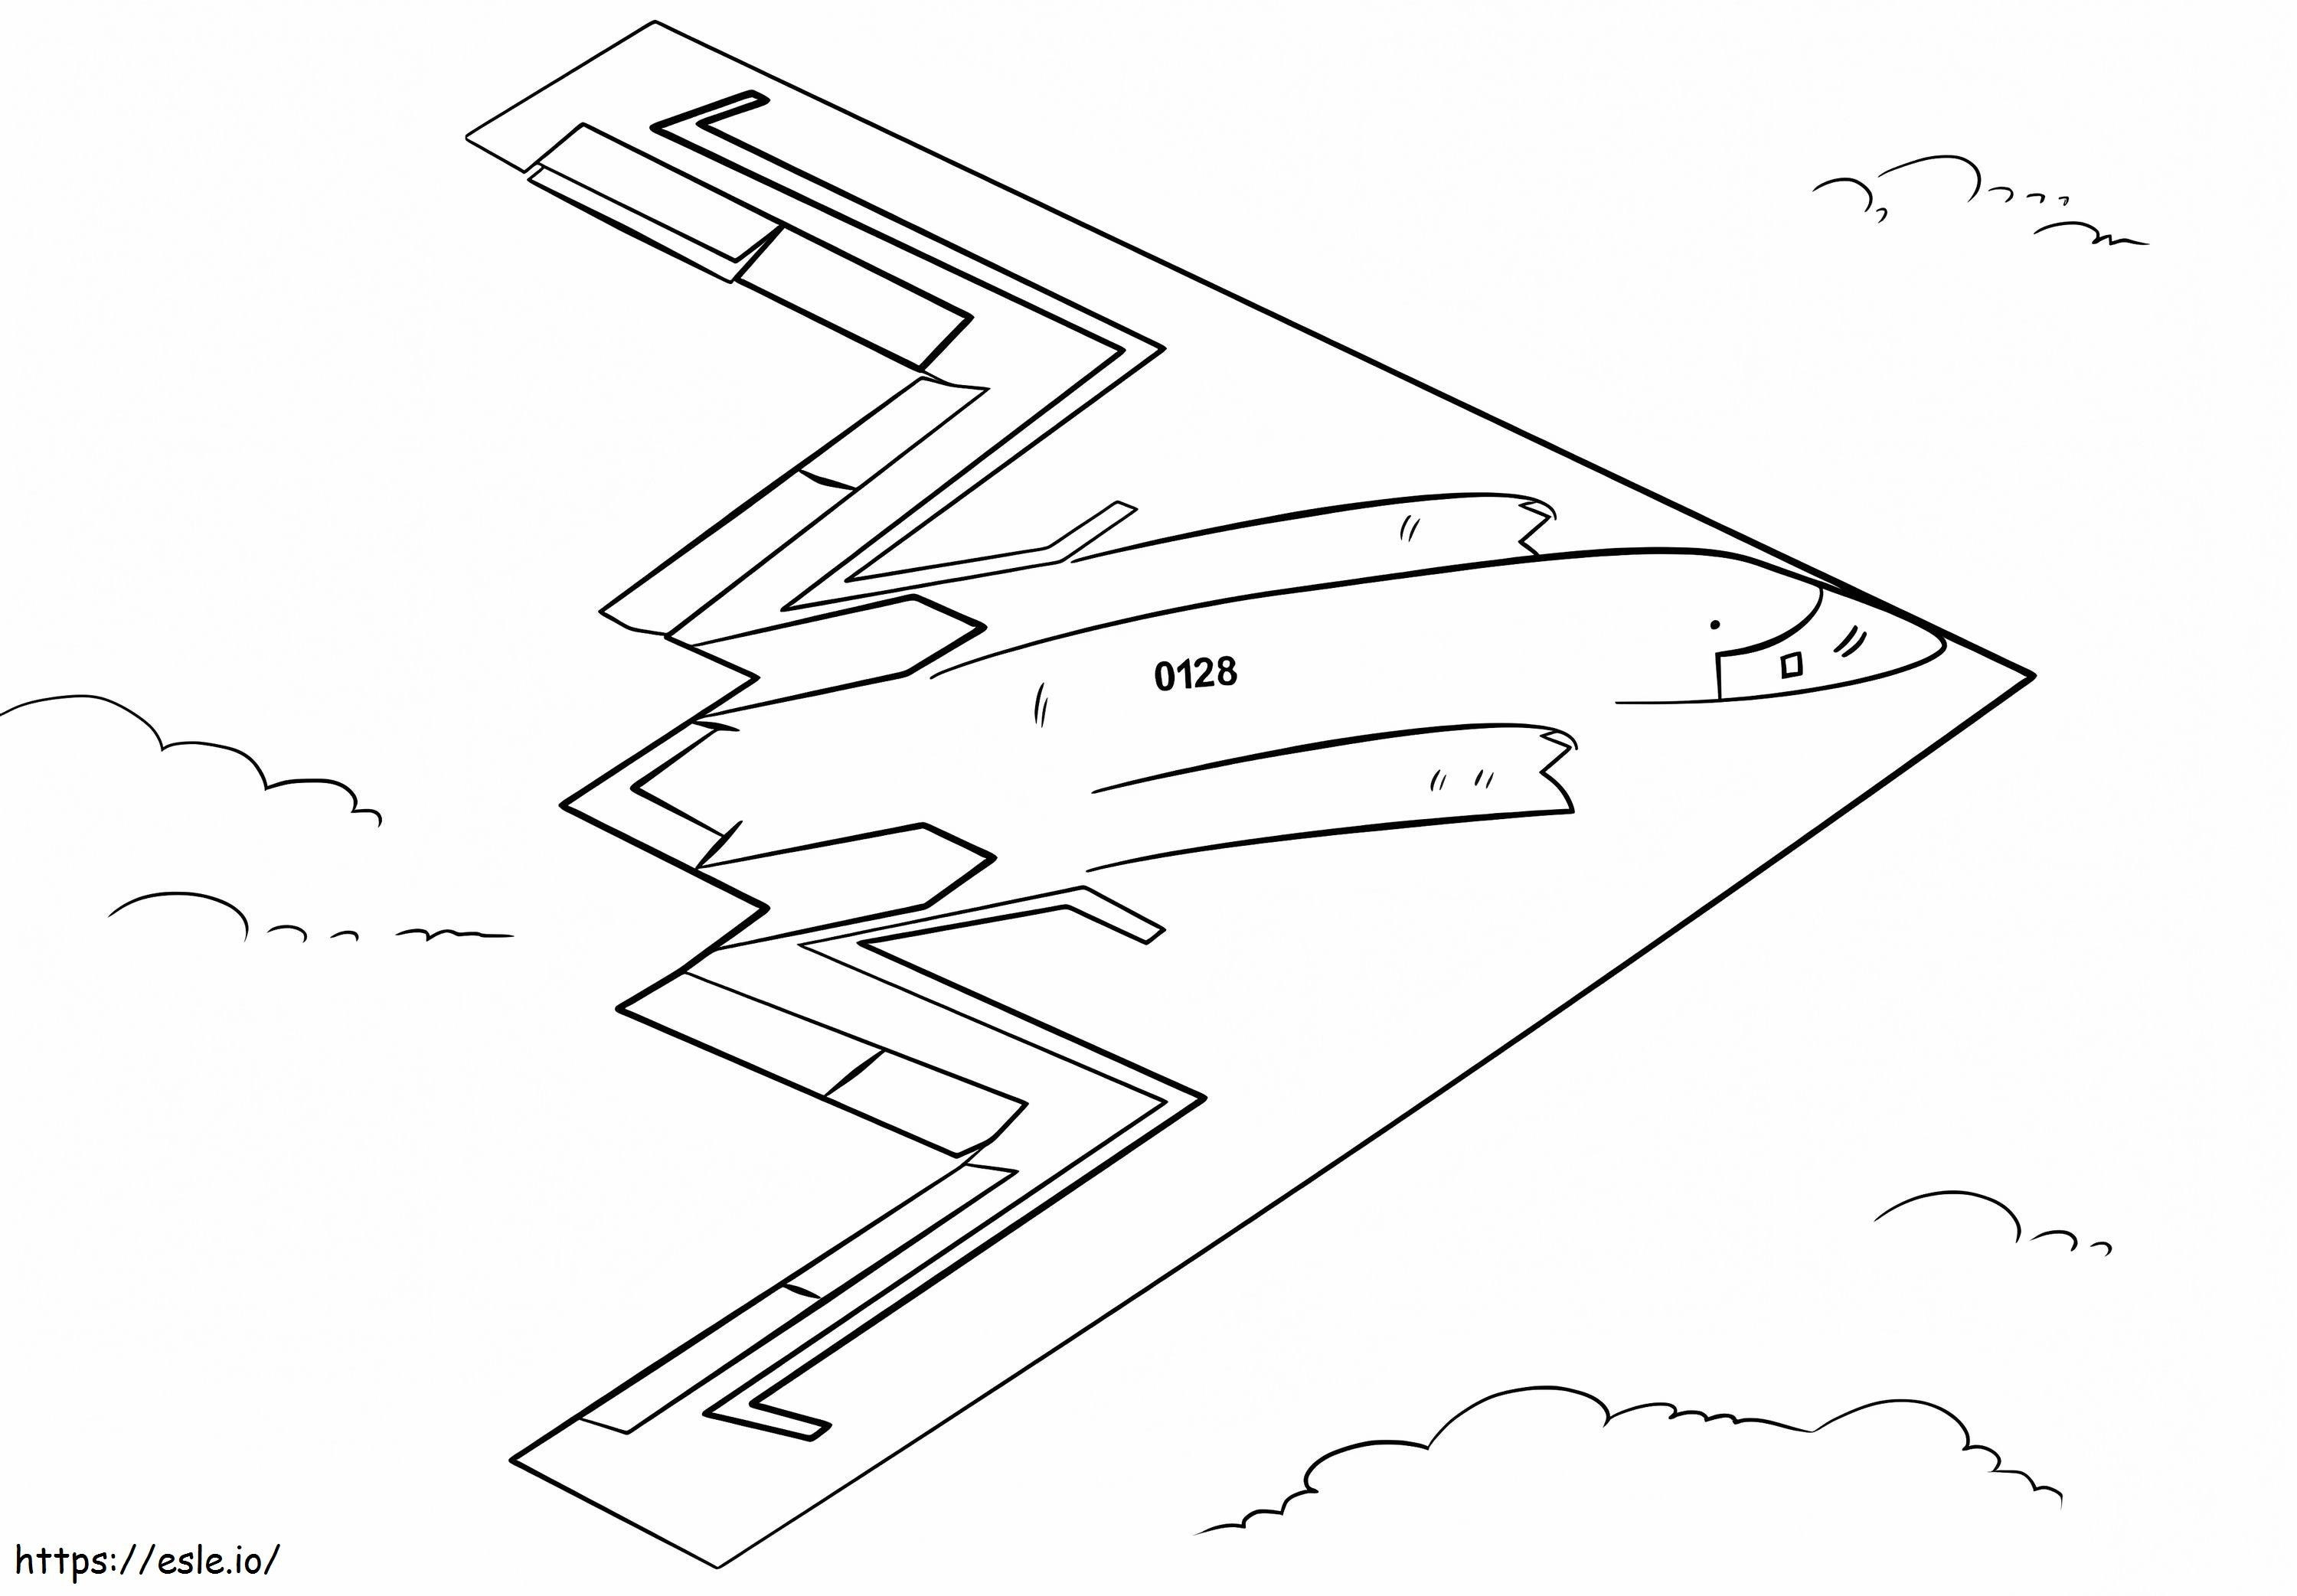 B 2 Stealth Bomber Fighter Jet coloring page